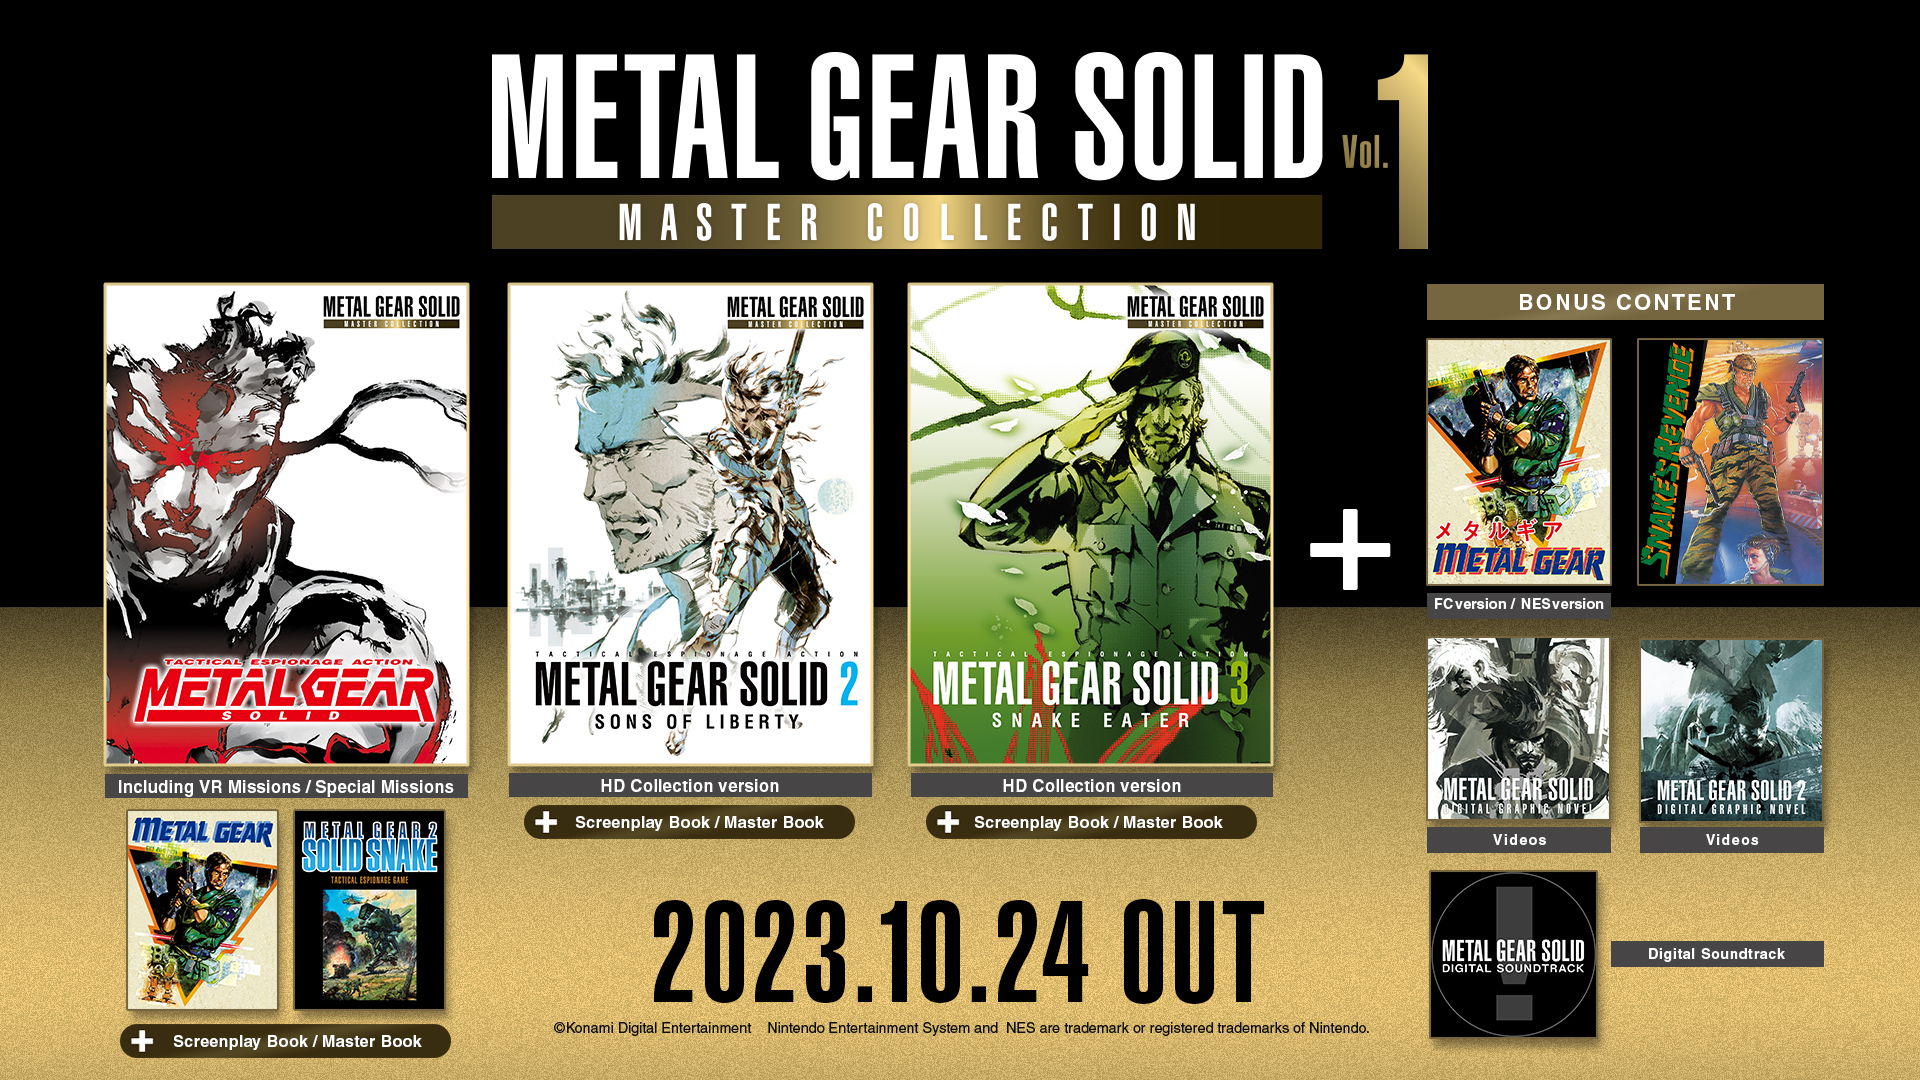 METAL GEAR SOLID: MASTER COLLECTION Vol. 1 sortira le 24 octobre sur Nintendo Switch™, PlayStation®5, Xbox Series X|S et Steam®